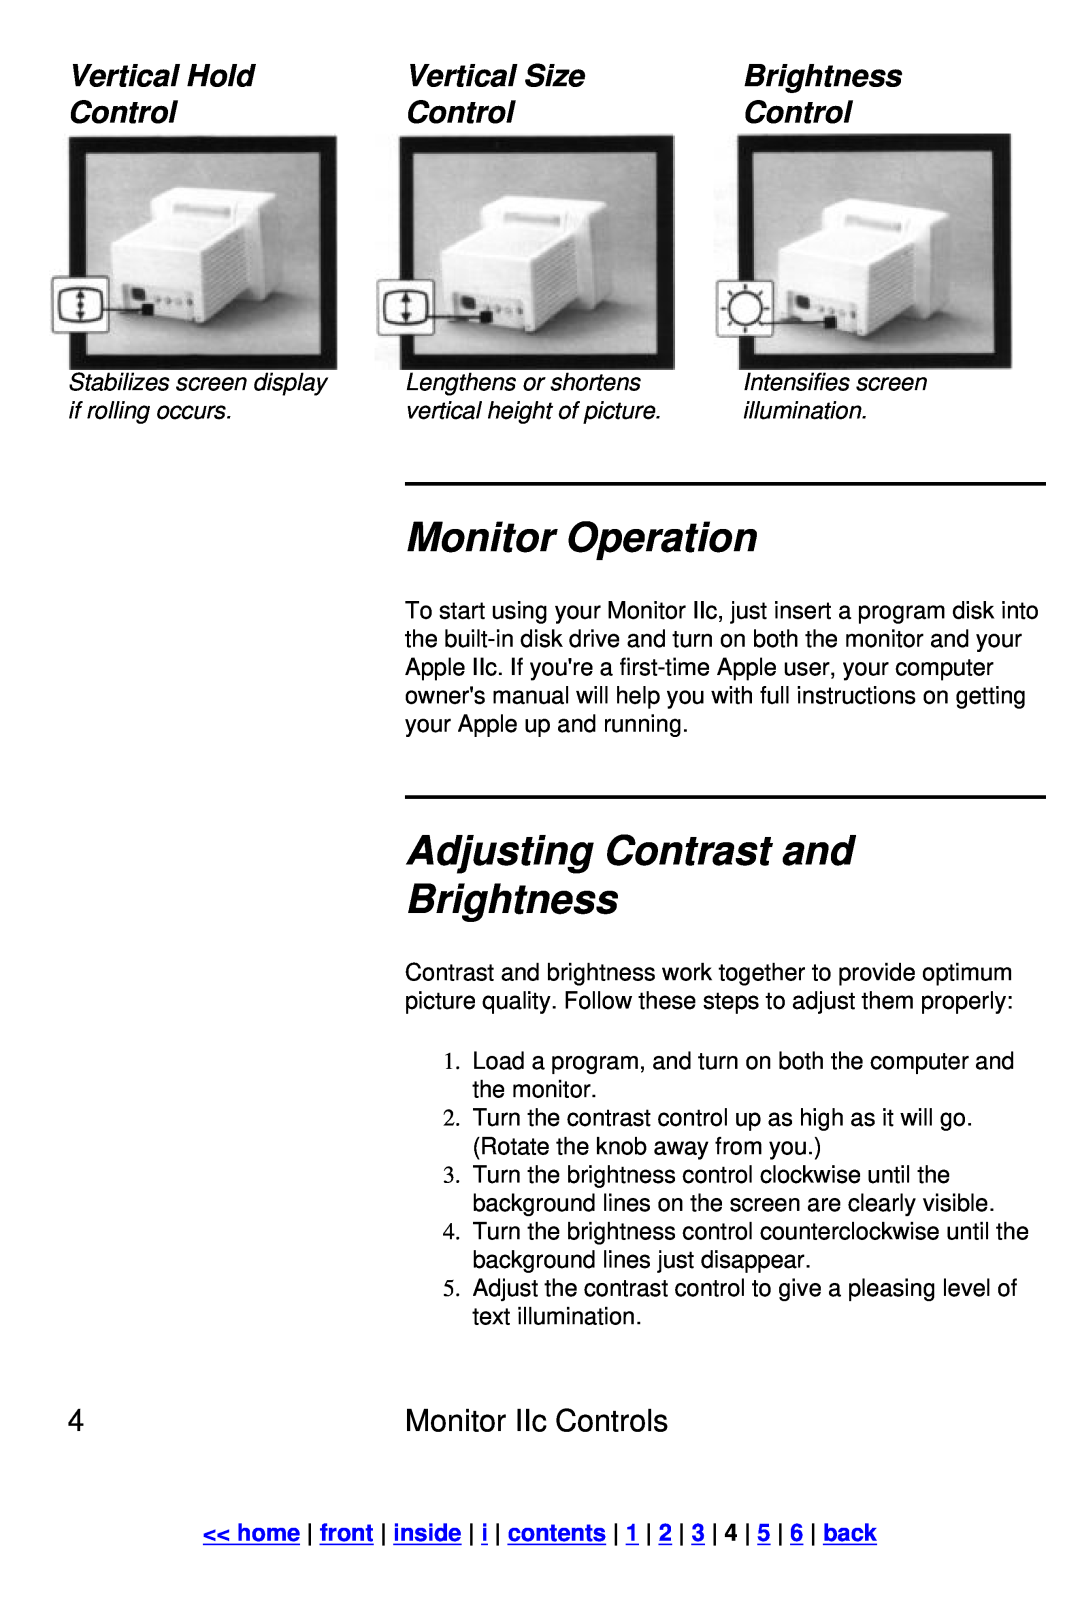 Apple IIc Monitor Operation, Adjusting Contrast and Brightness, Vertical Hold, Vertical Size, Control, if rolling occurs 